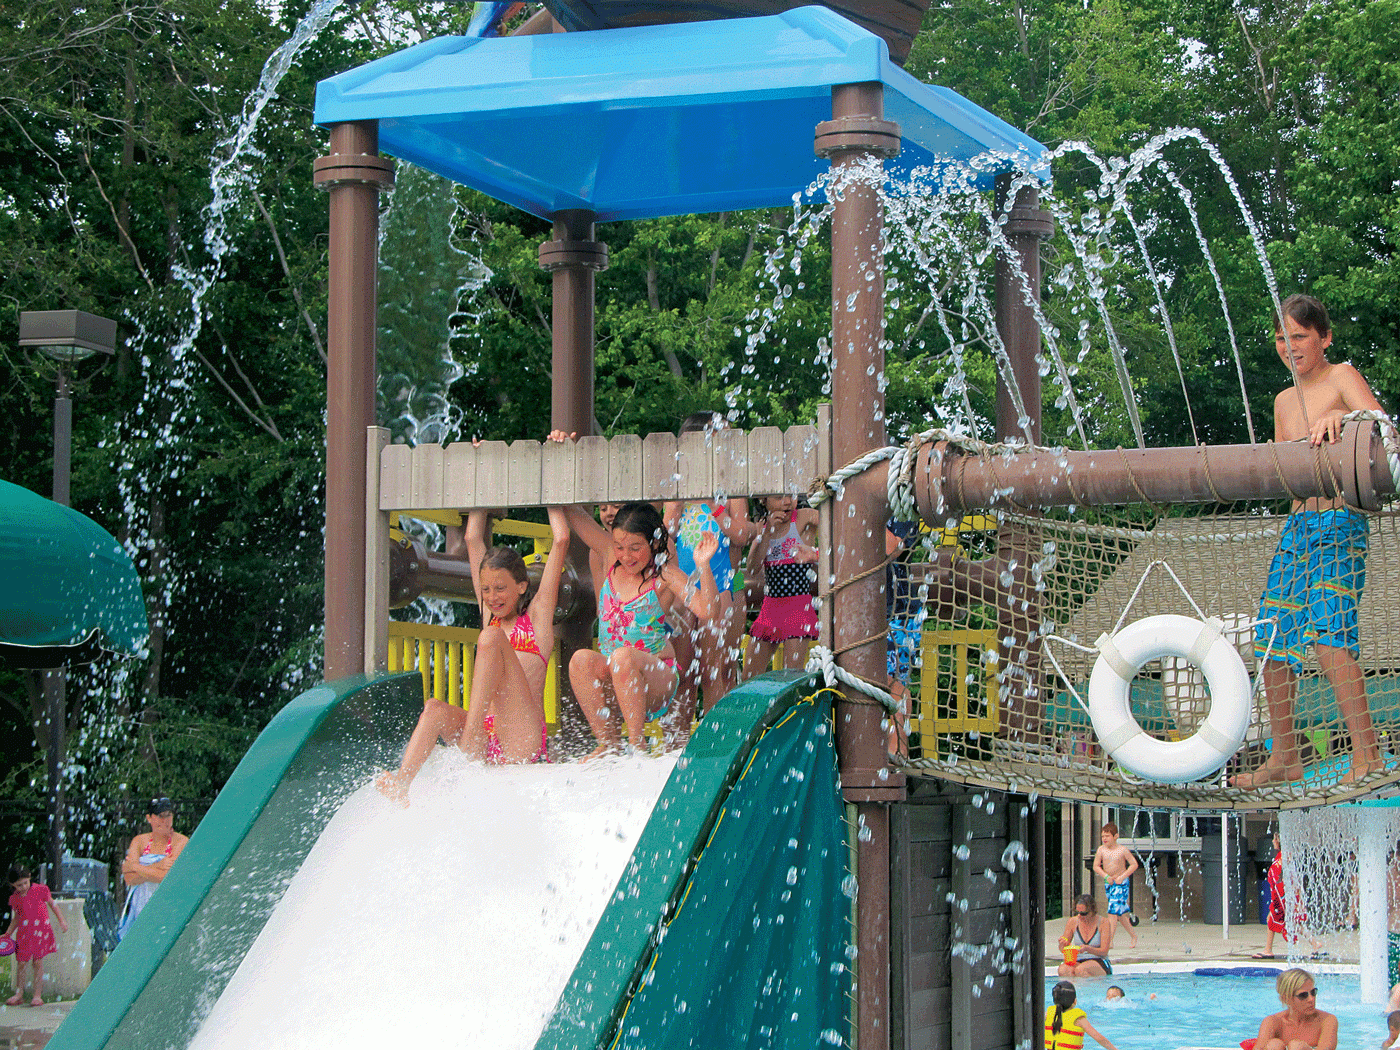 The water slide at the Outdoor Waterpark and Outdoor swimming Pool at the West Chester Area YMCA 